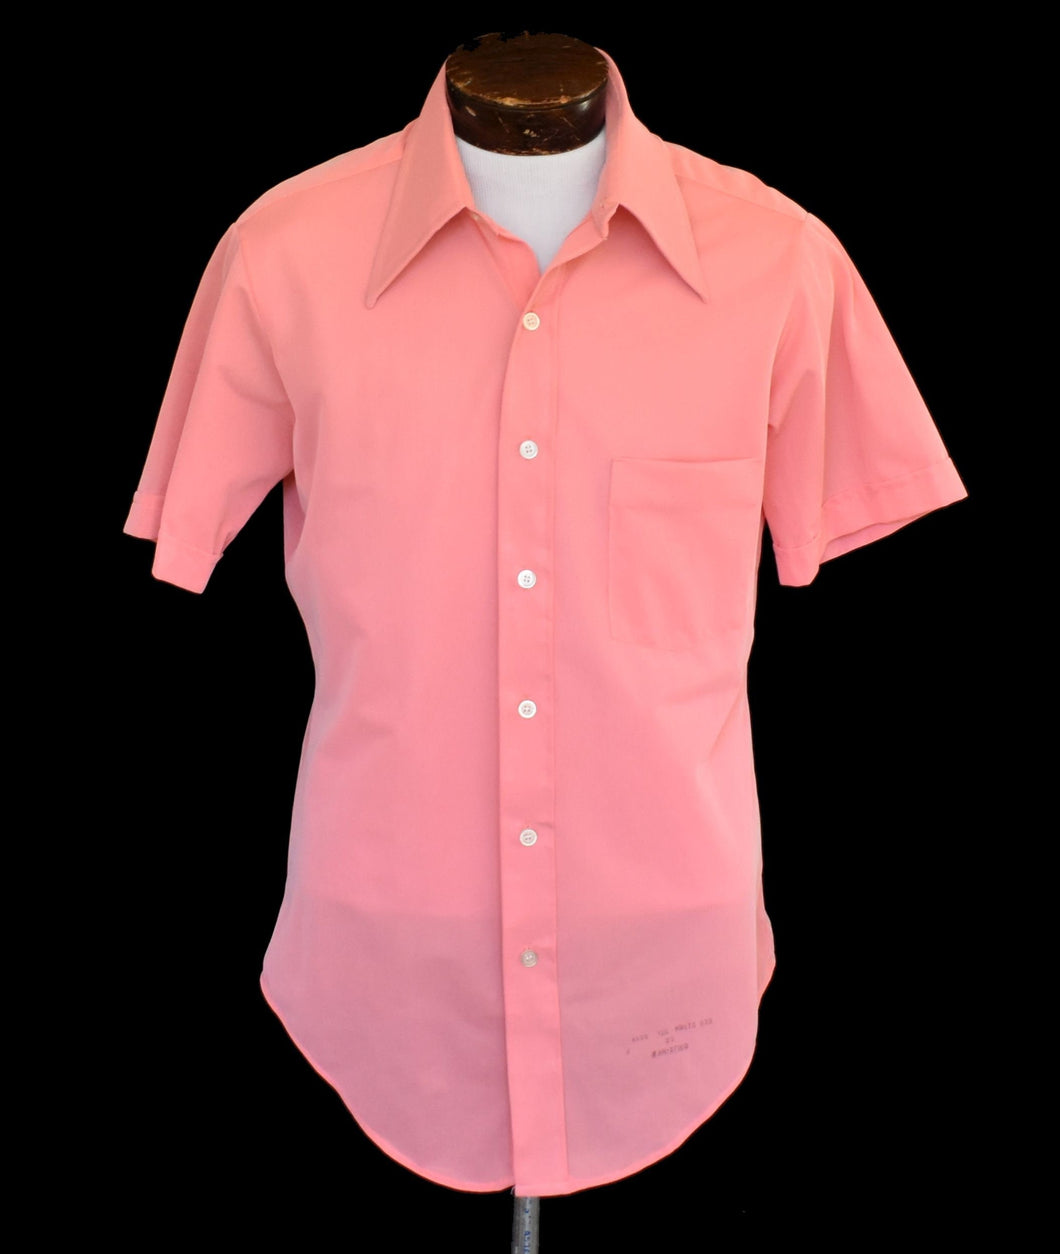 Vintage 70s Semi Sheer Coral Pink Shirt,  Polyester Button Front, Vintage 1970s, Size Medium